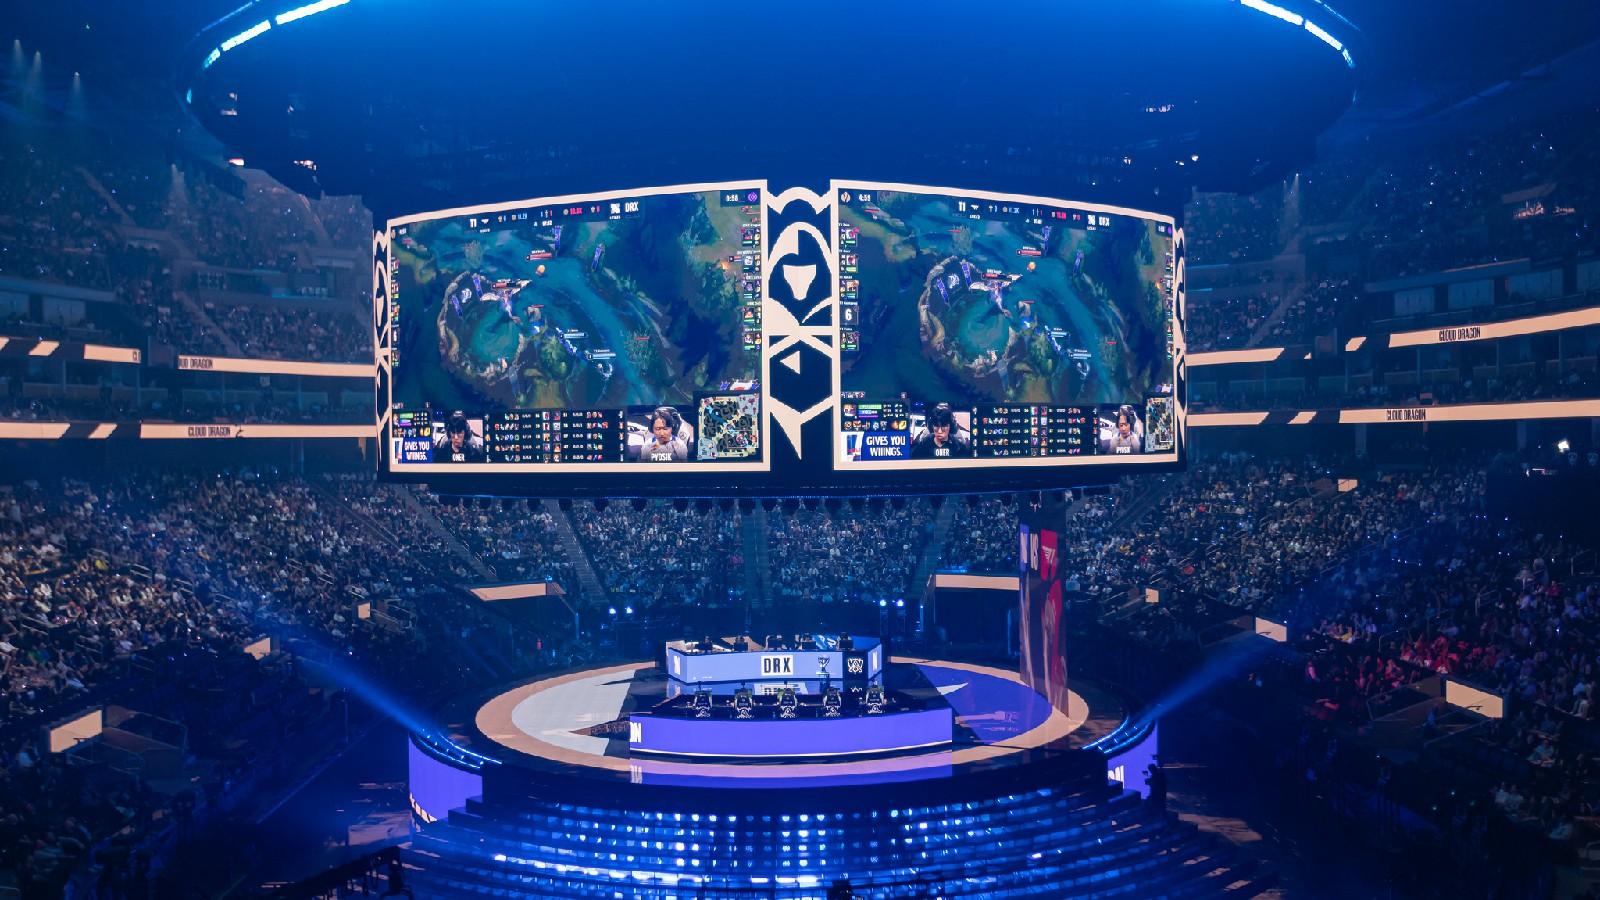 MSI 2023 co-streamers: Languages, channels, where to watch